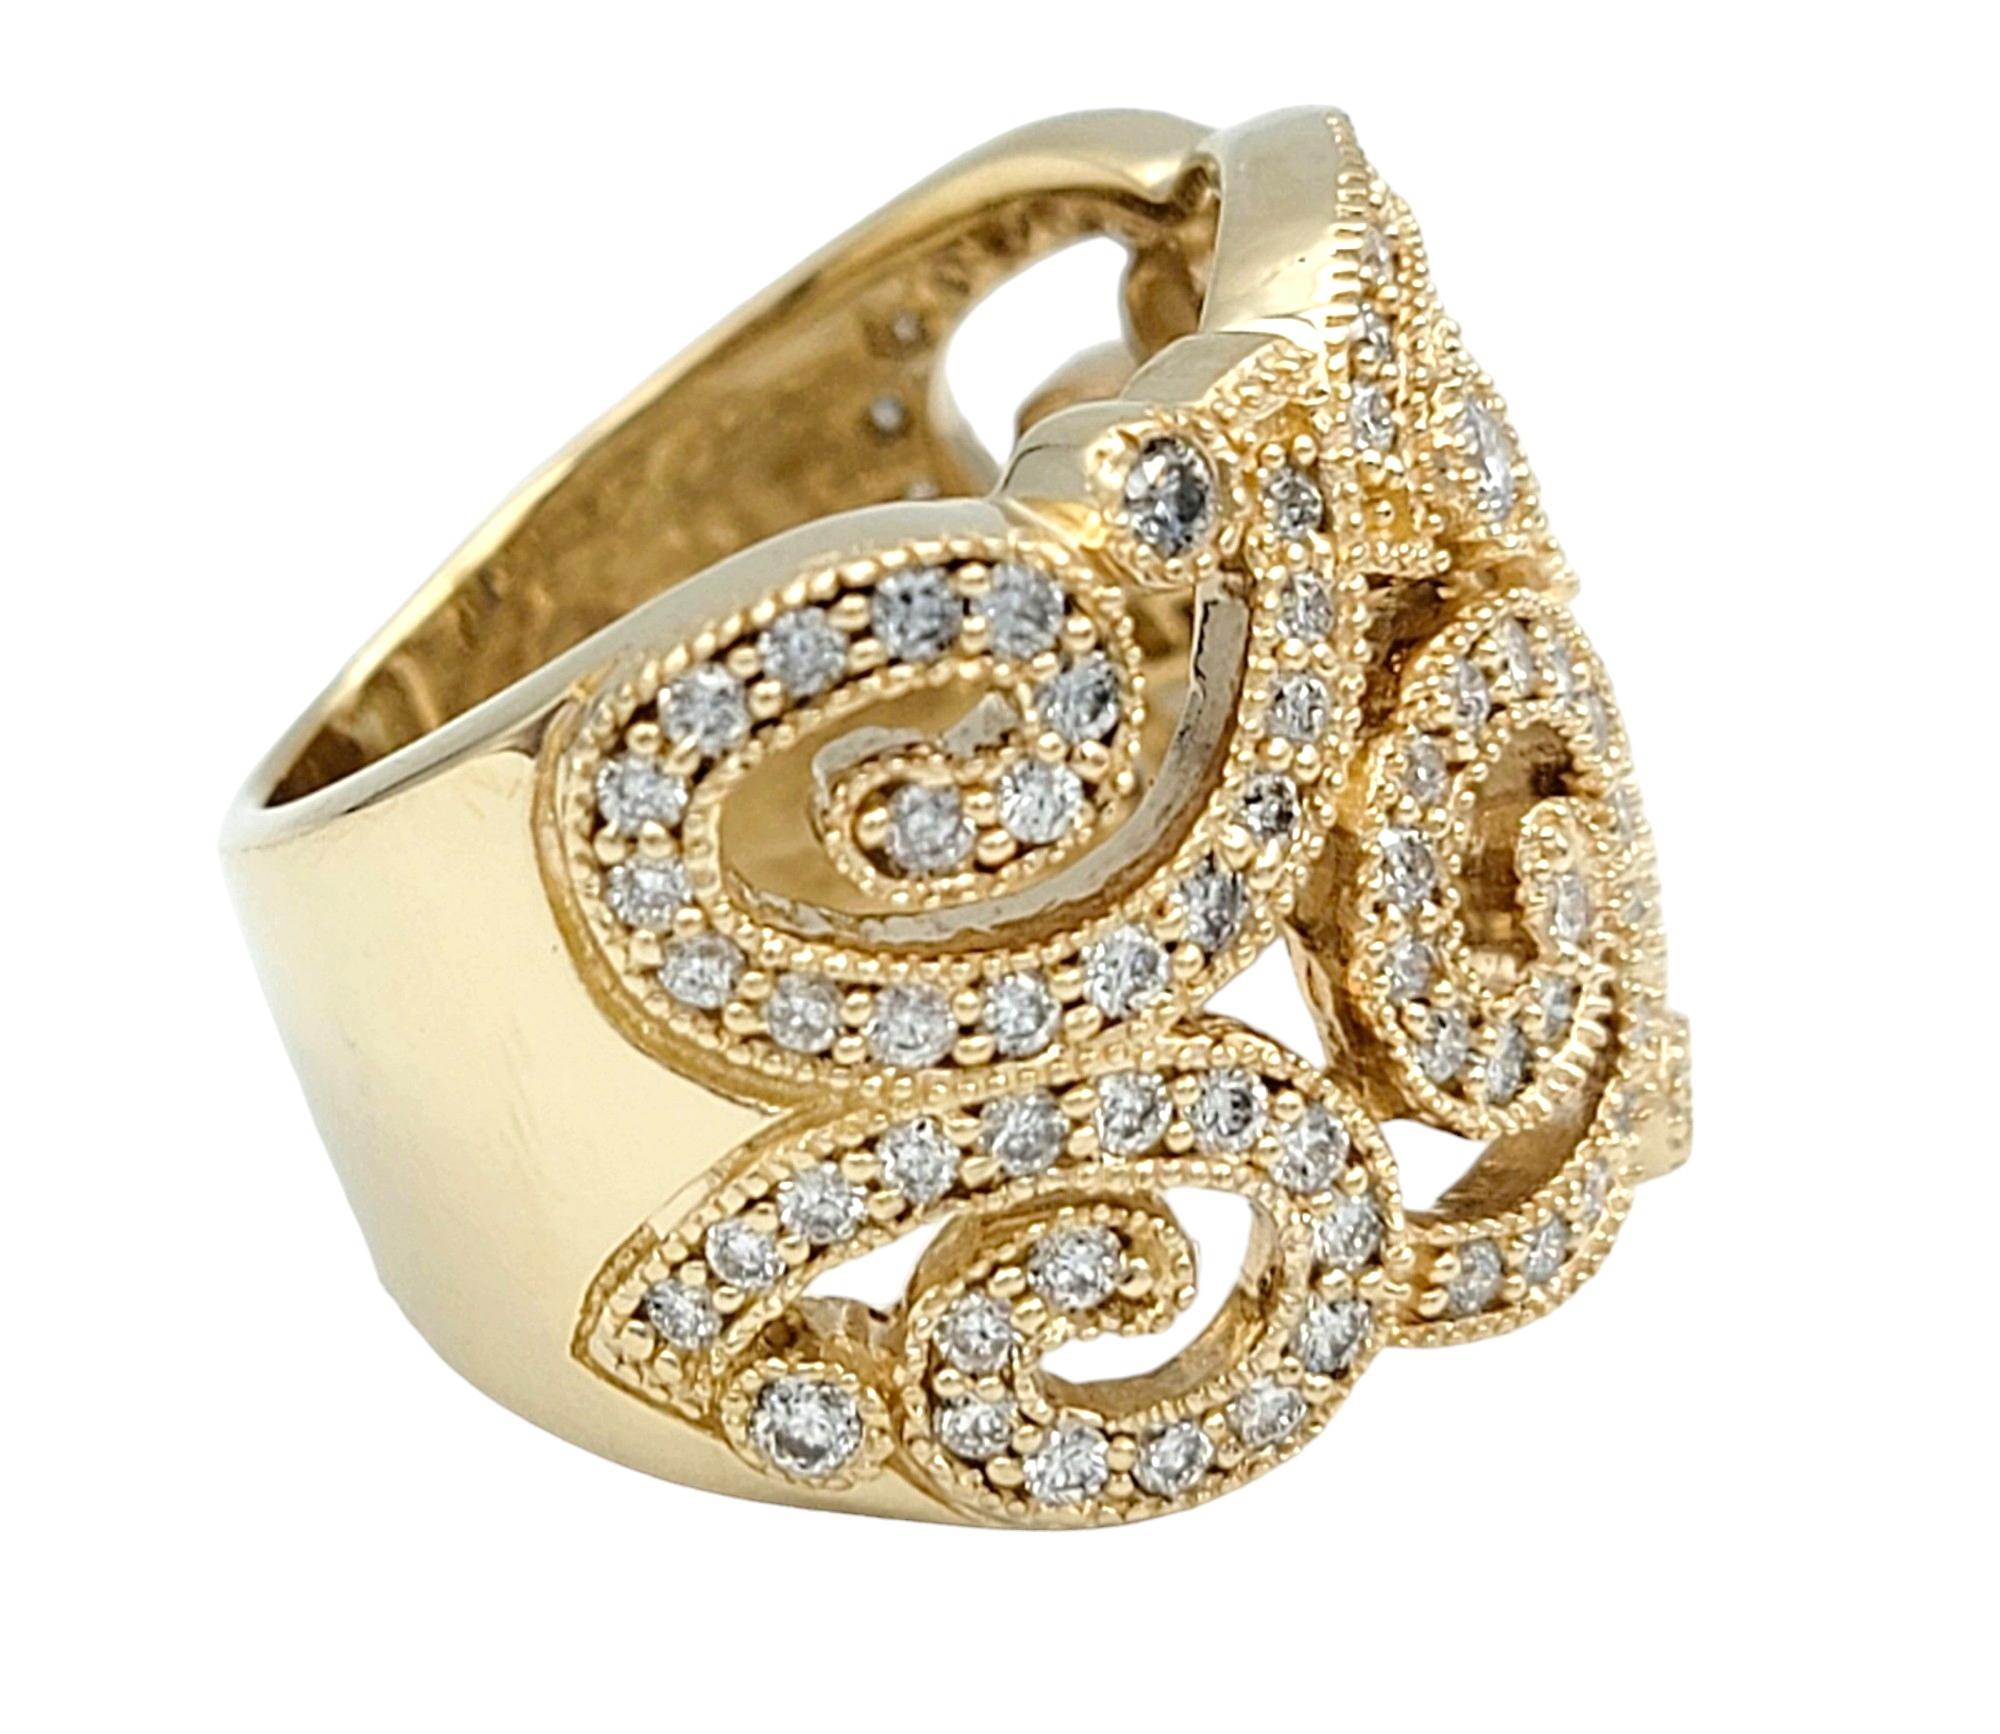 Effy Pavé Diamond Scroll Design Wide Cocktail Band Ring in 14 Karat Yellow Gold In Good Condition For Sale In Scottsdale, AZ